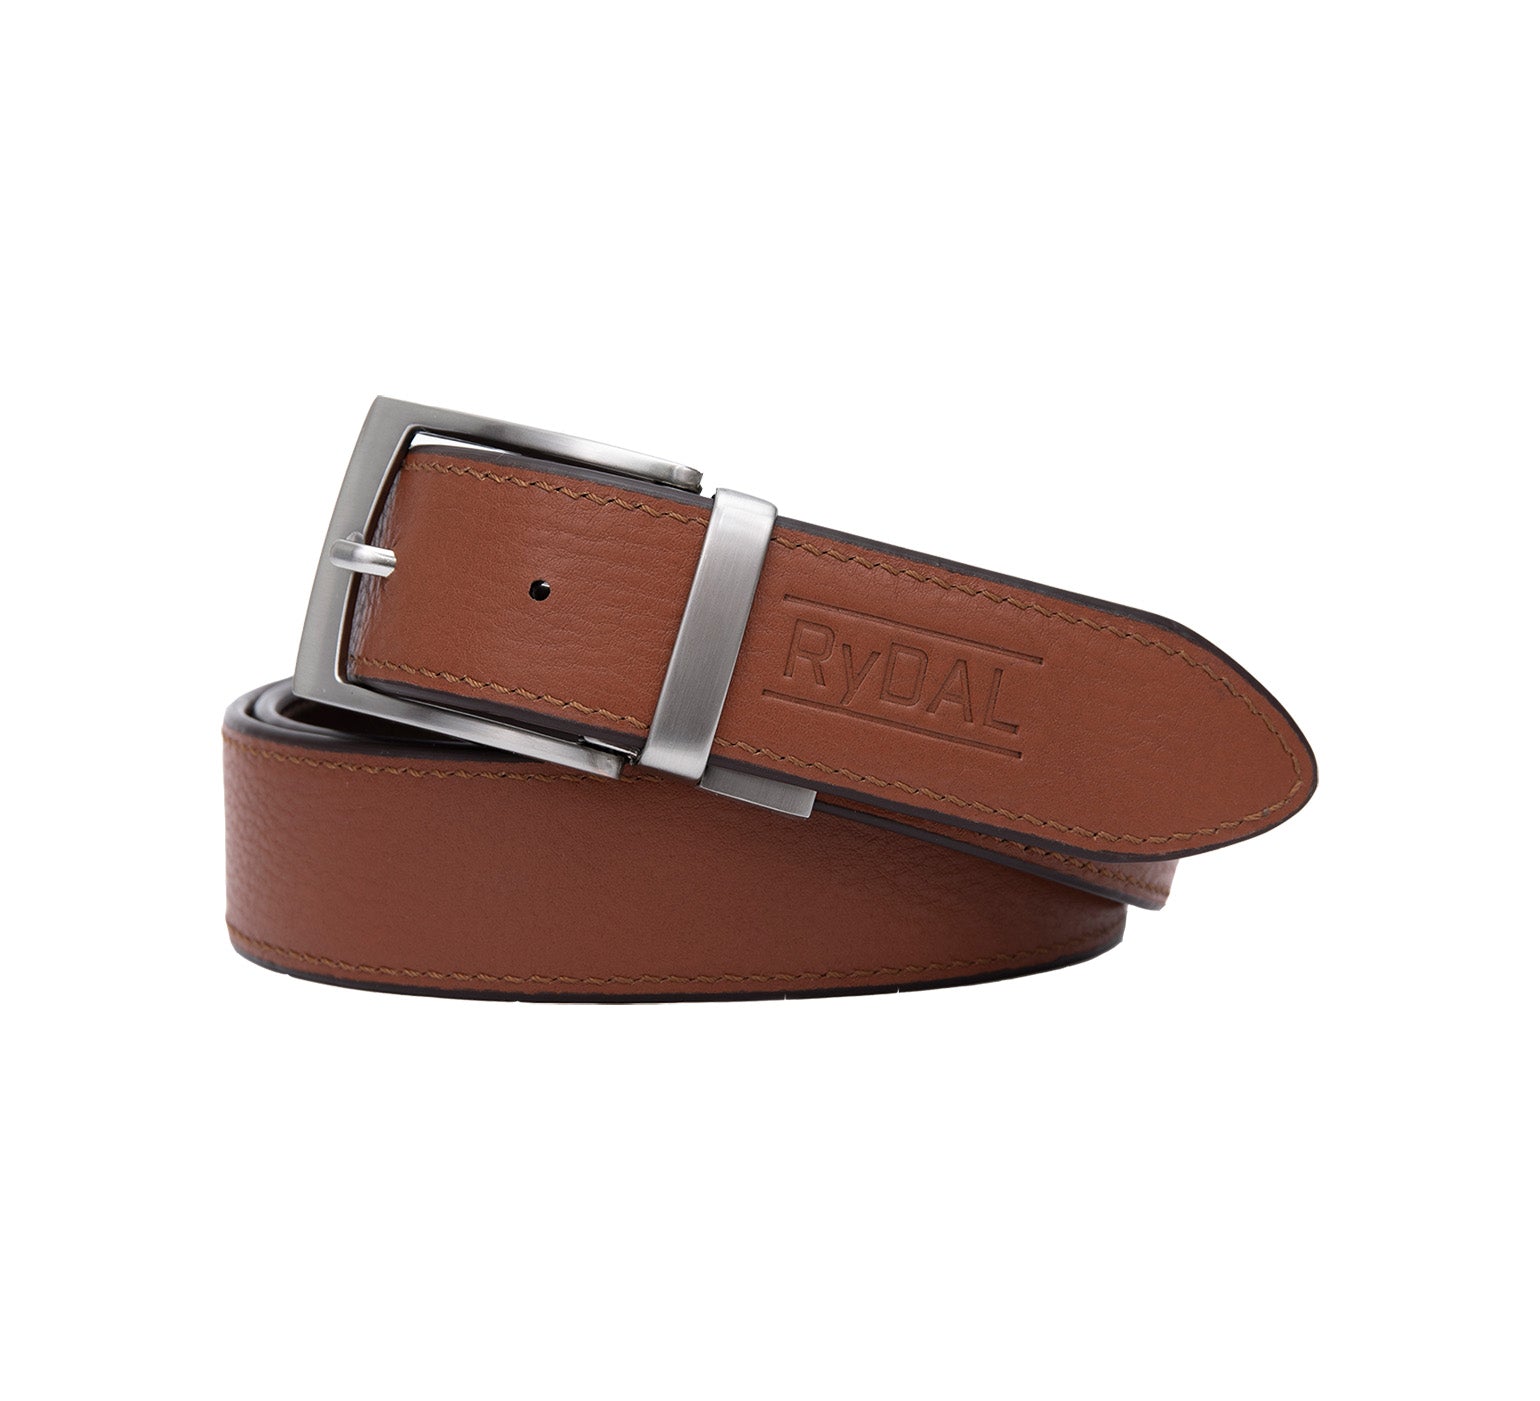 Firenze Mens Reversible Leather Belt from Rydal in 'Dark Brown/Rust' showing rust.